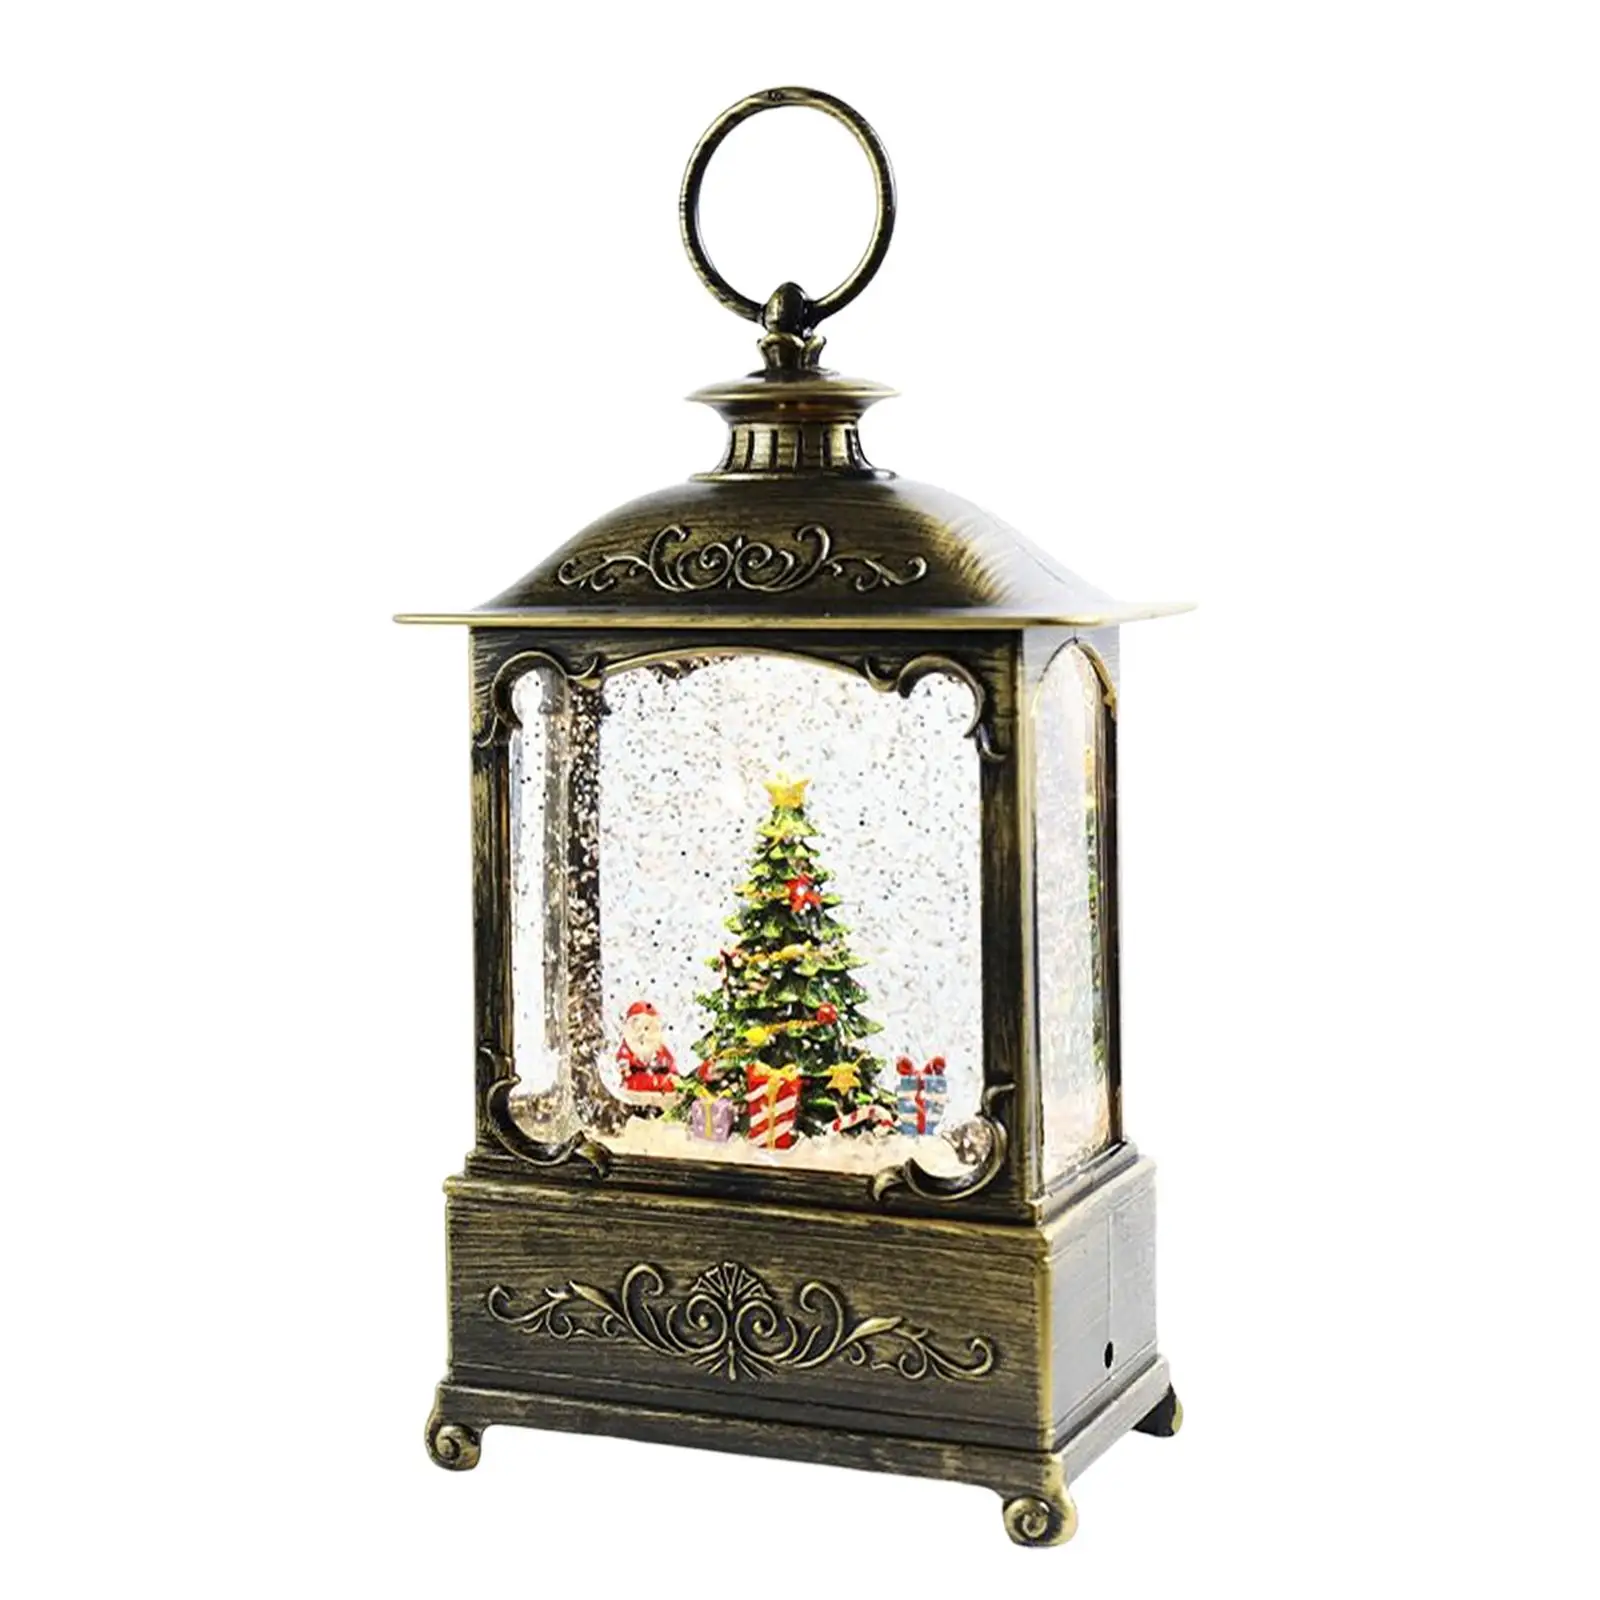 Christmas Music Box Lantern Rotating Battery Operated Wind Lamp Musical Box Toy for Party Holiday Wedding Decor Kids Girls Gift